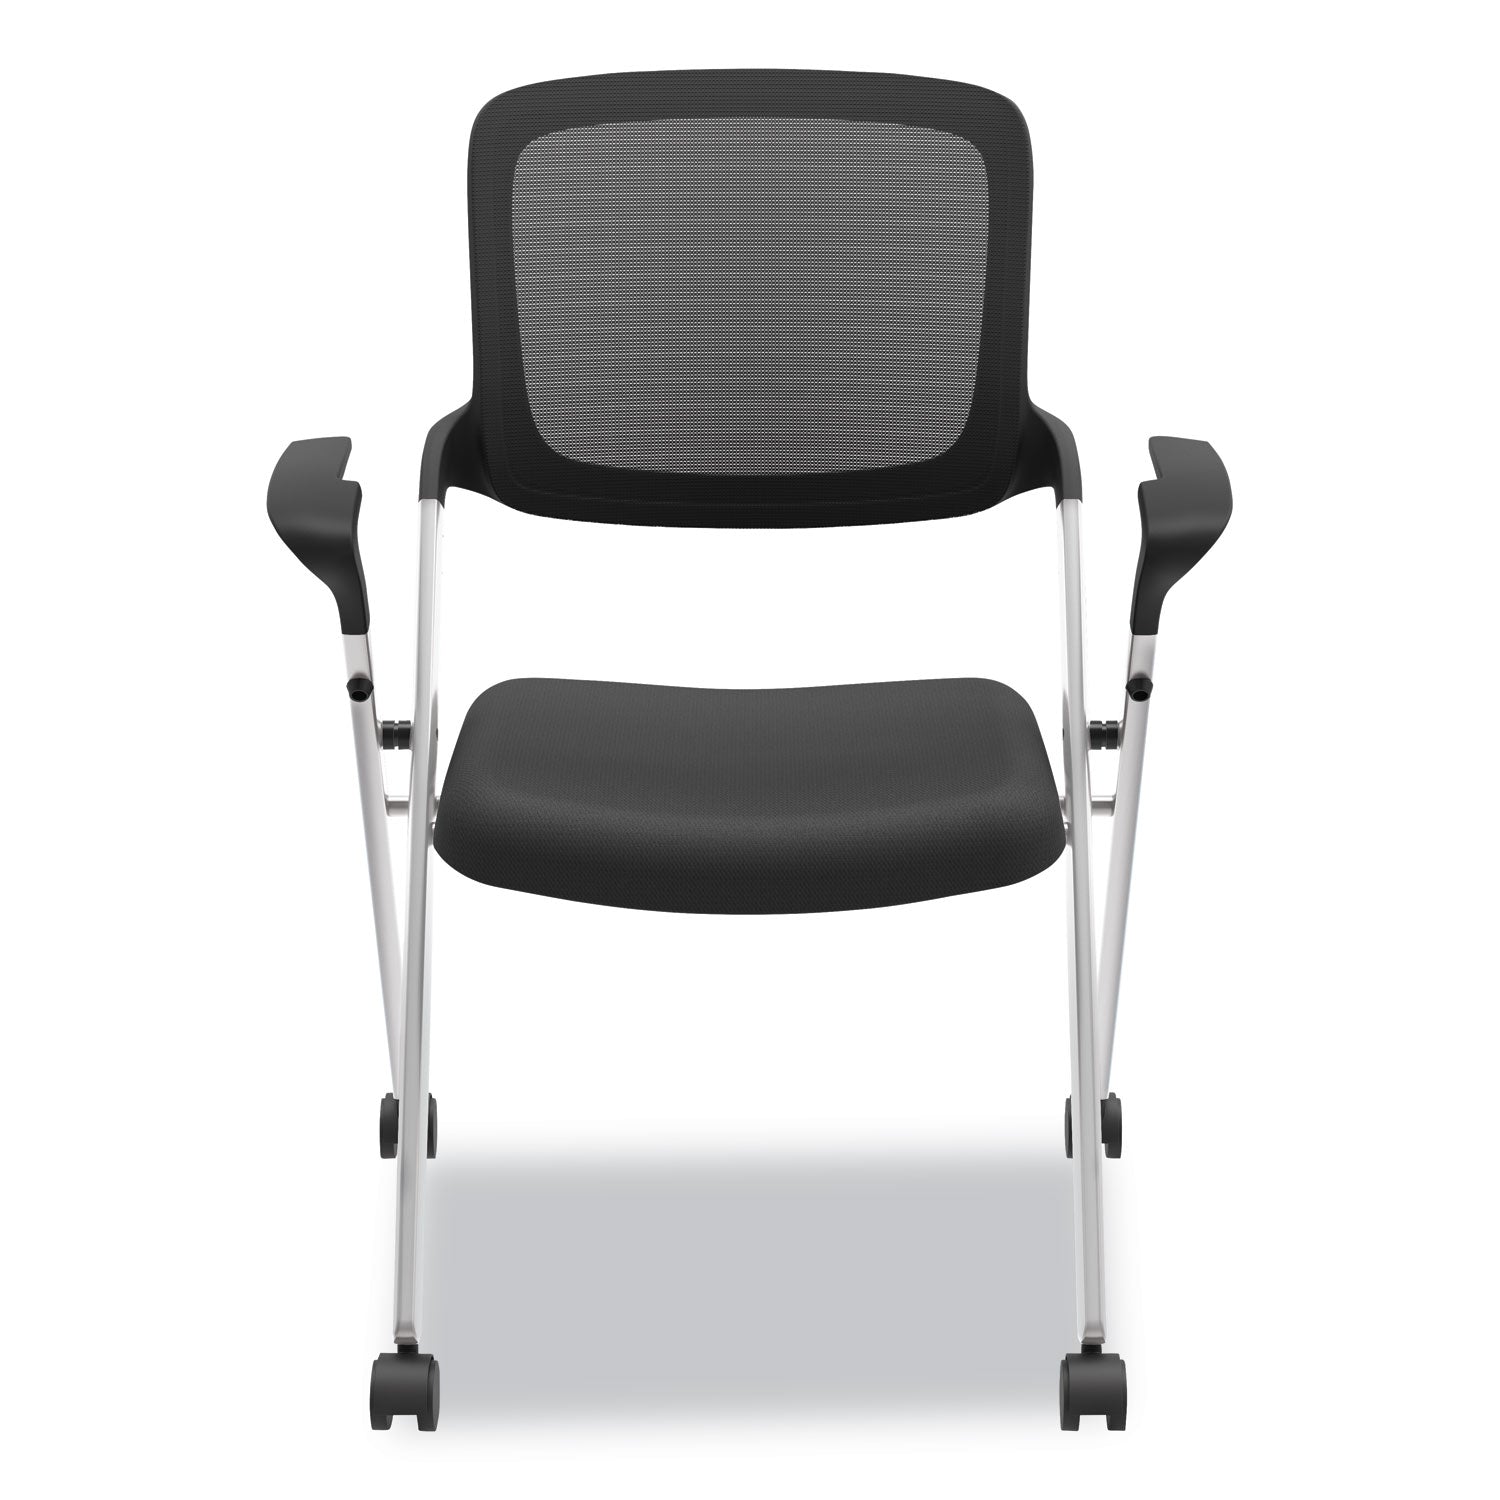 vl314-mesh-back-nesting-chair-supports-up-to-250-lb-19-seat-height-black-seat-black-back-silver-base_bsxvl314slvr - 2